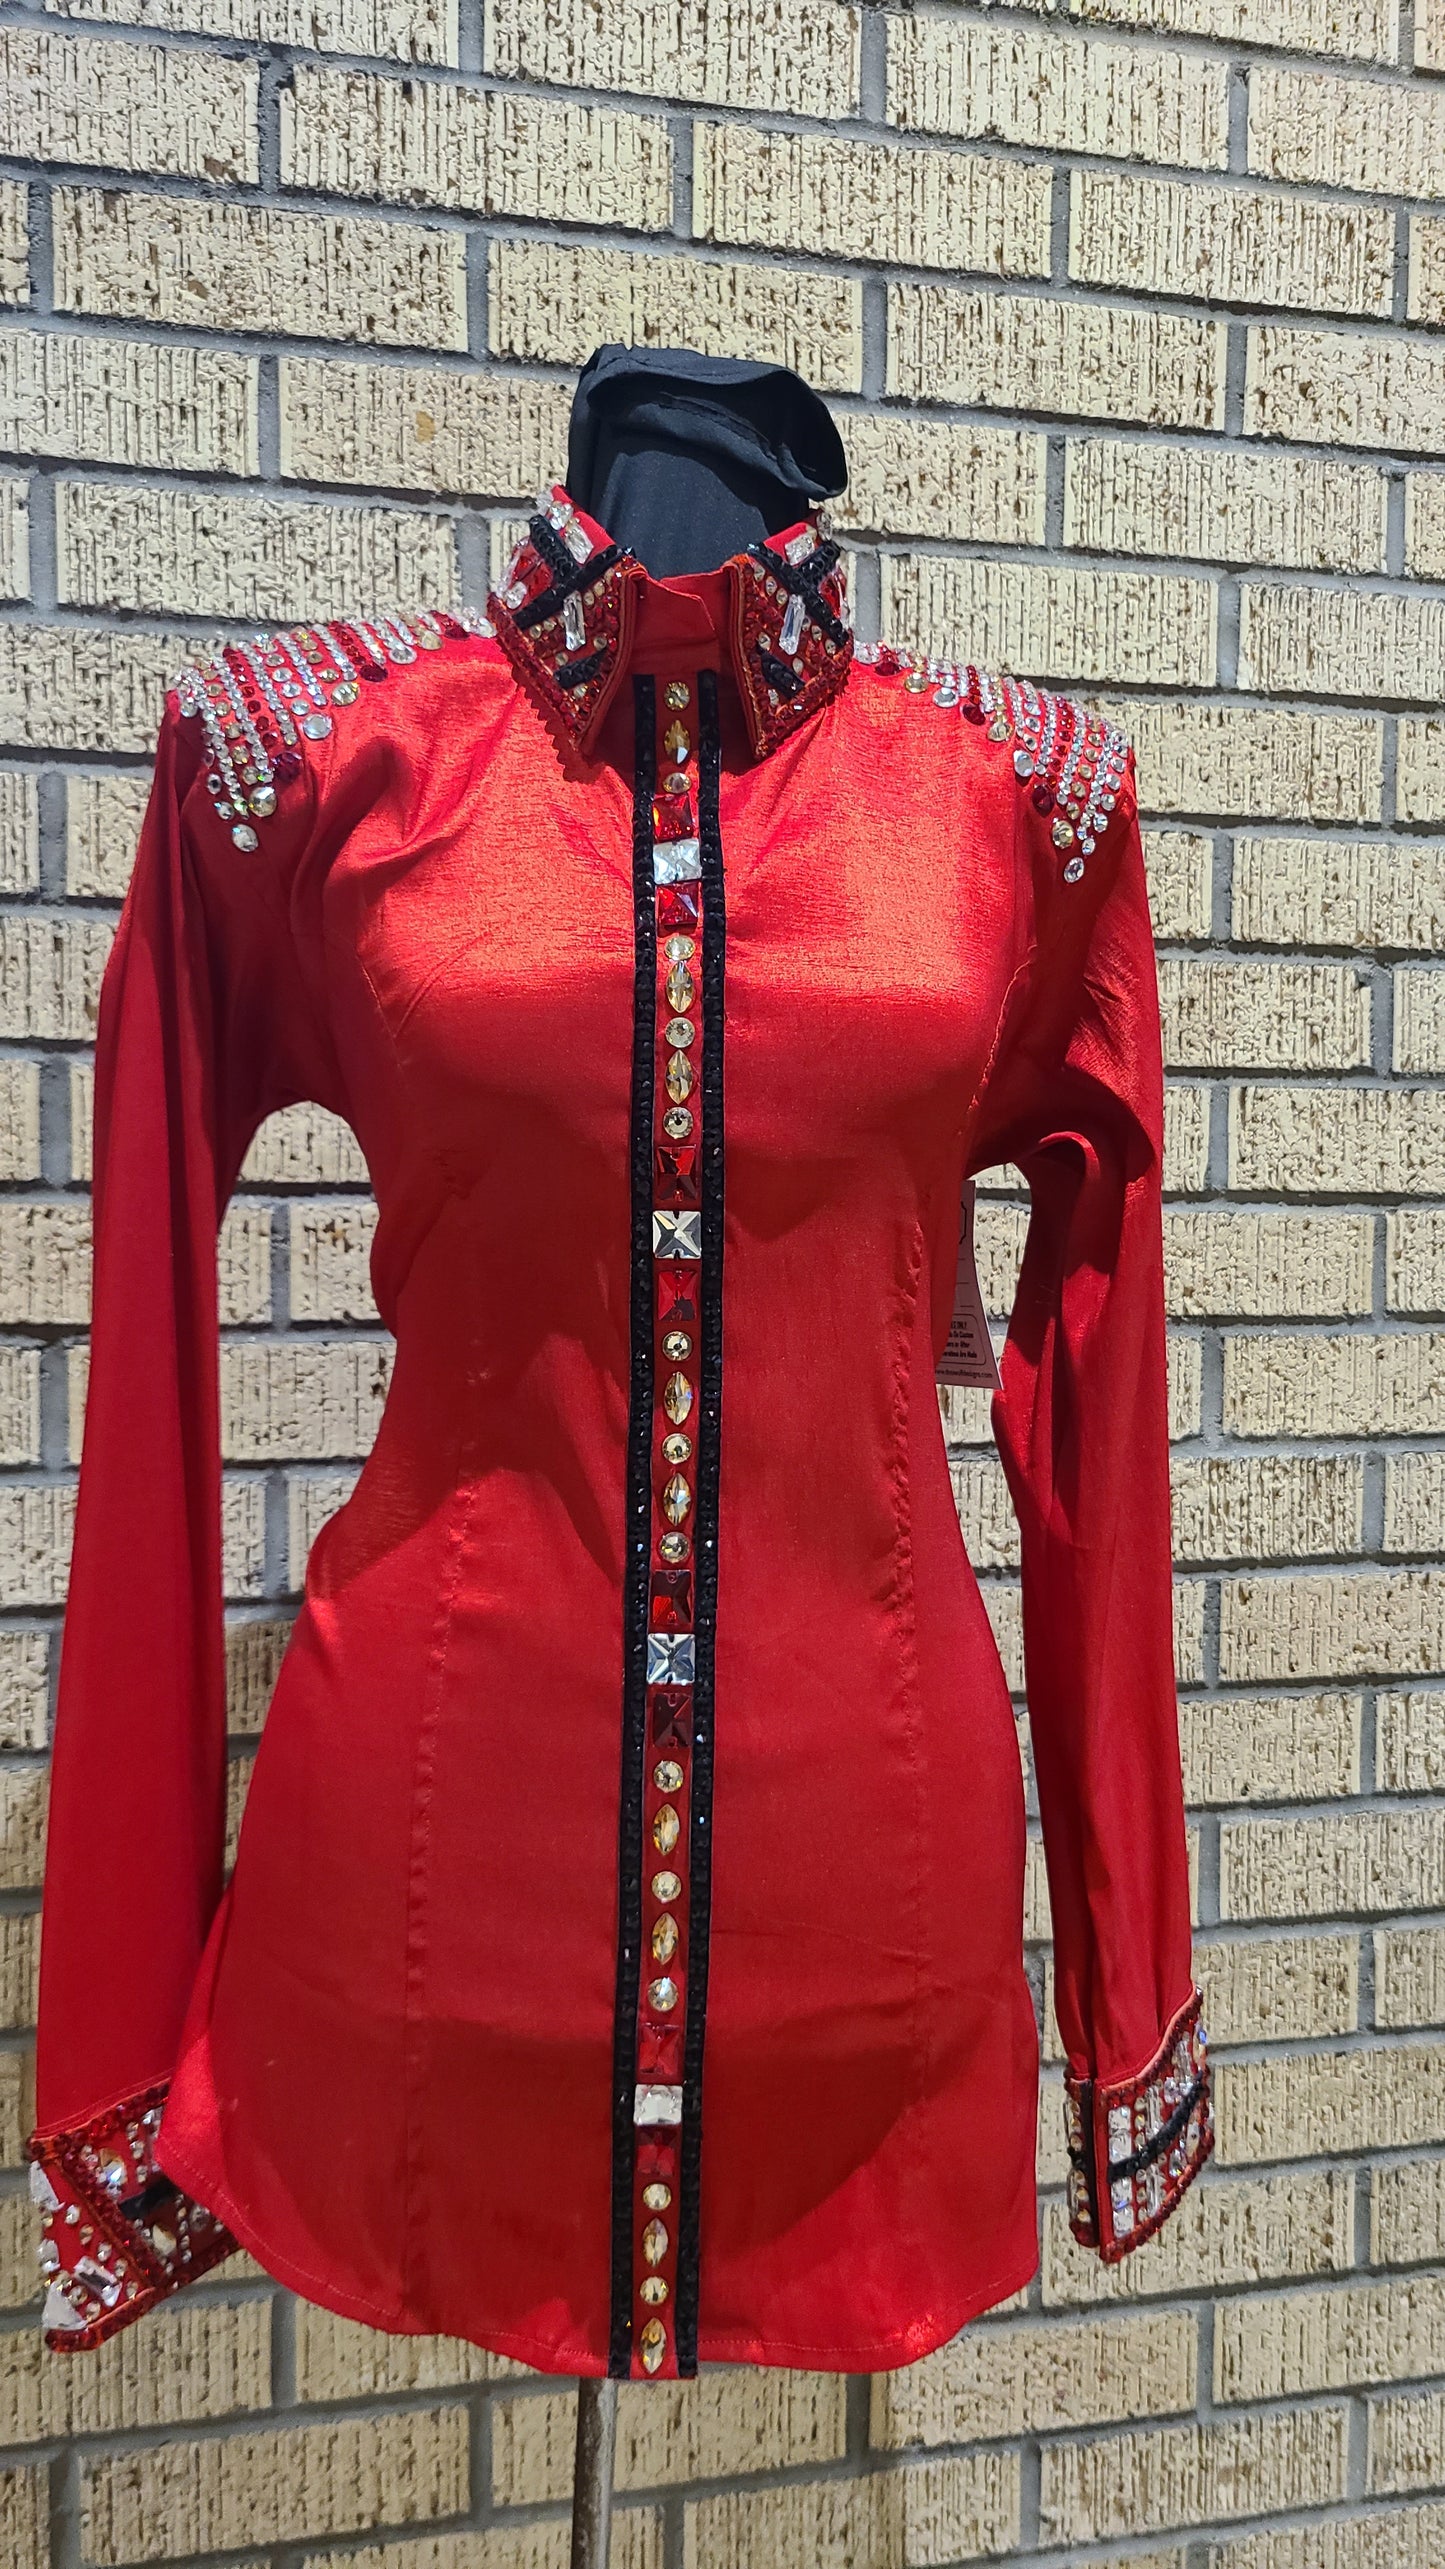 Size medium stretch red taffeta with silver, red and black accents